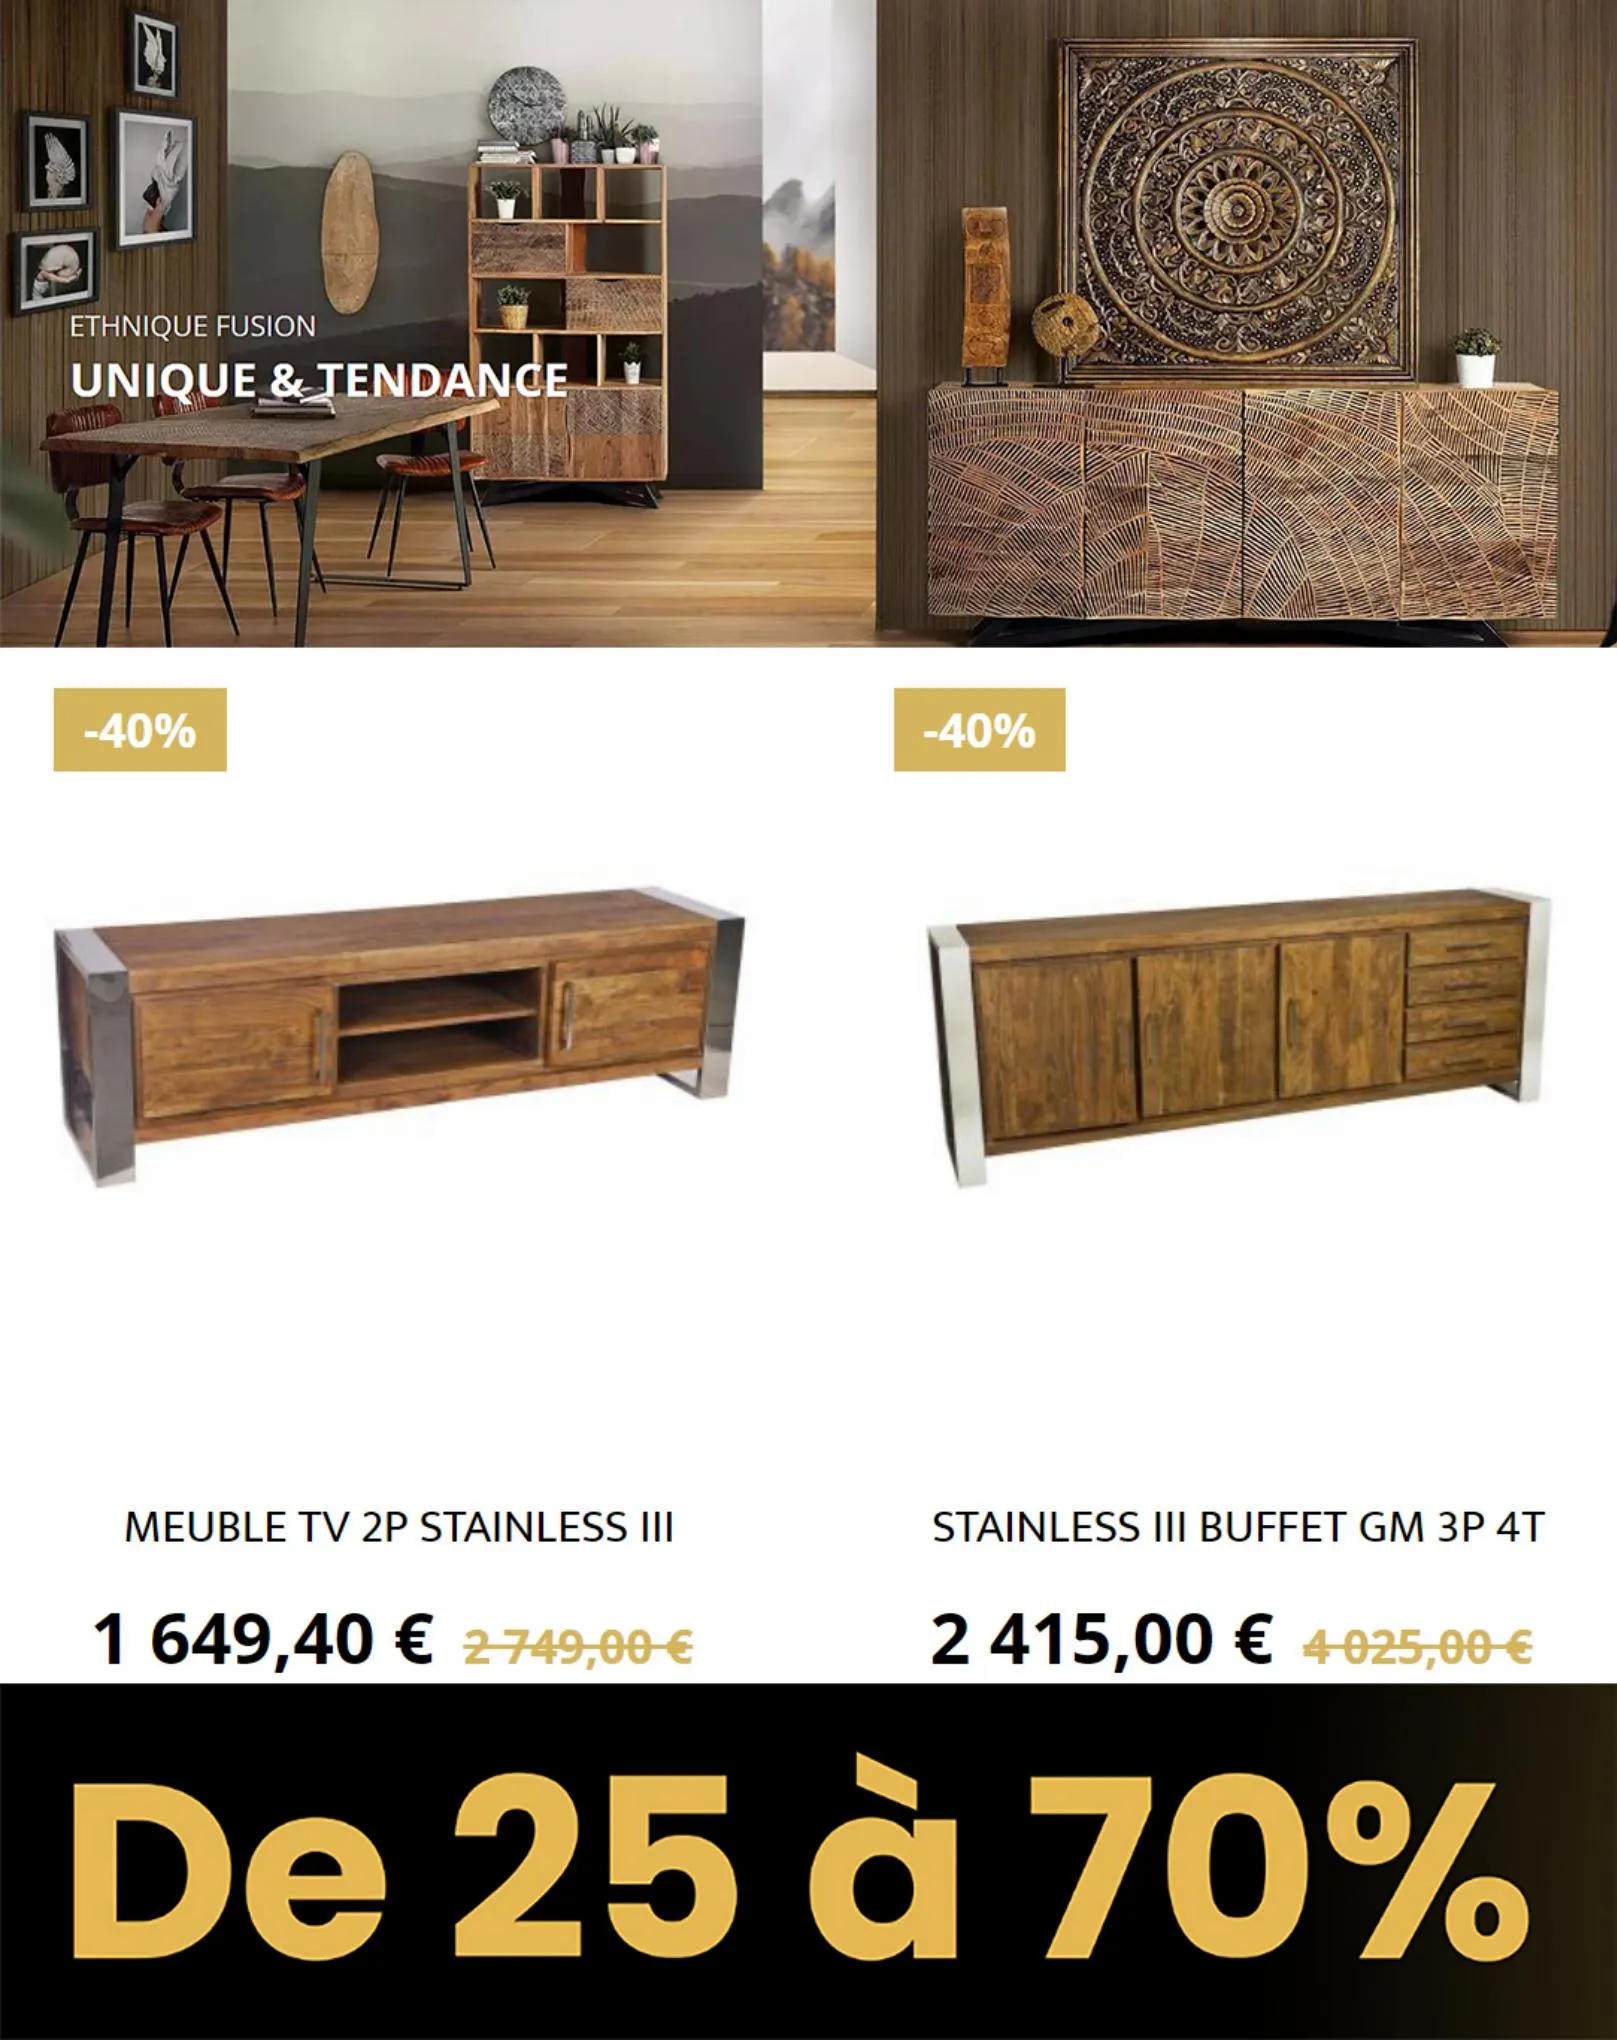 Catalogue Offres 25%-70%!, page 00002